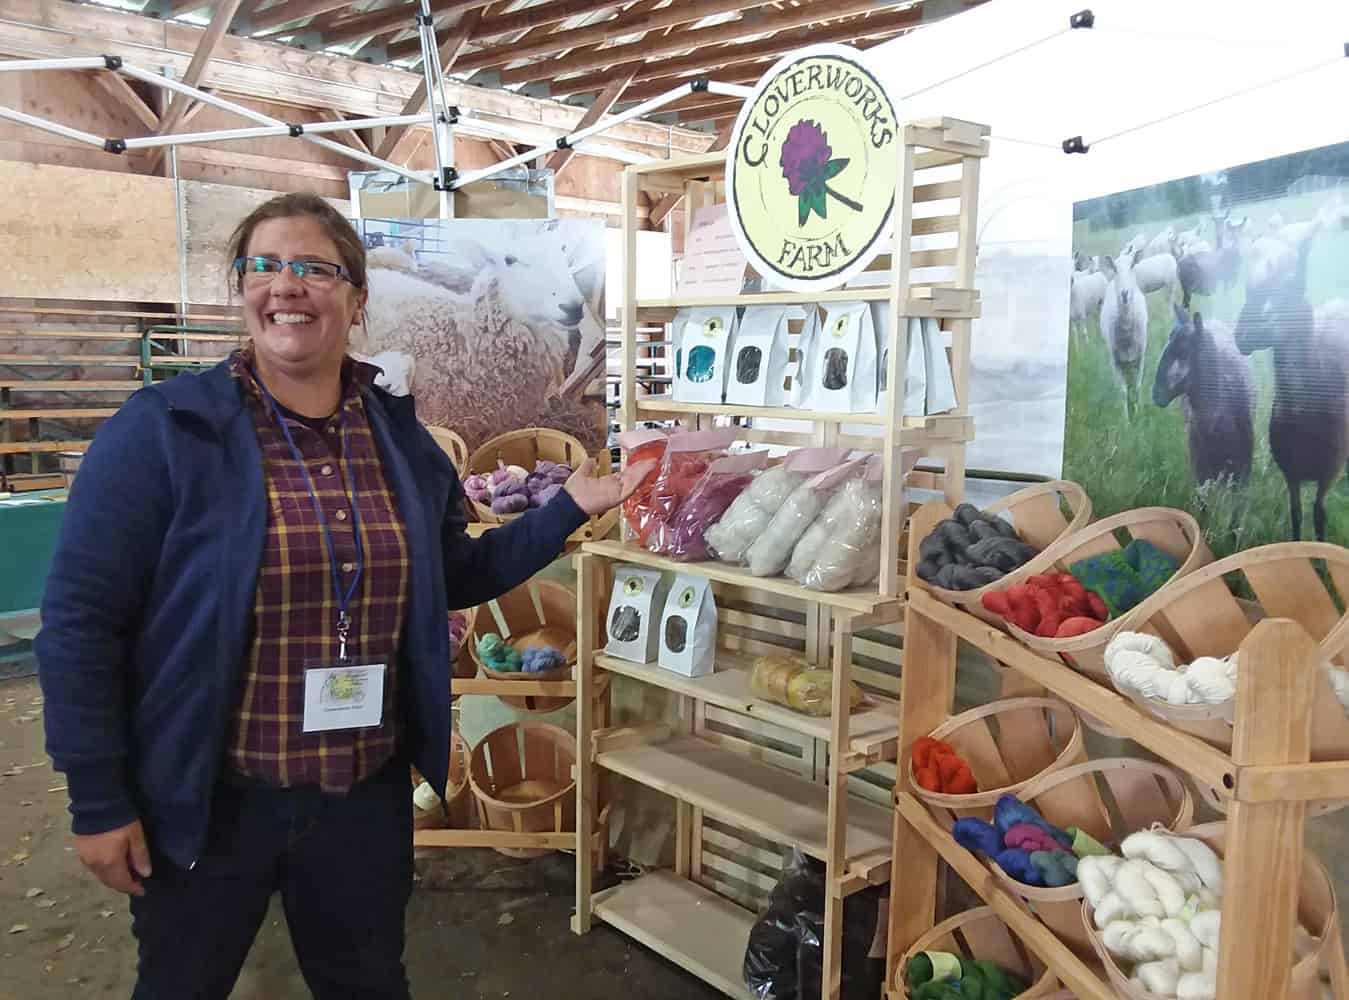 Sheep and Wool Festival Vendor with Yarn and Fabrics